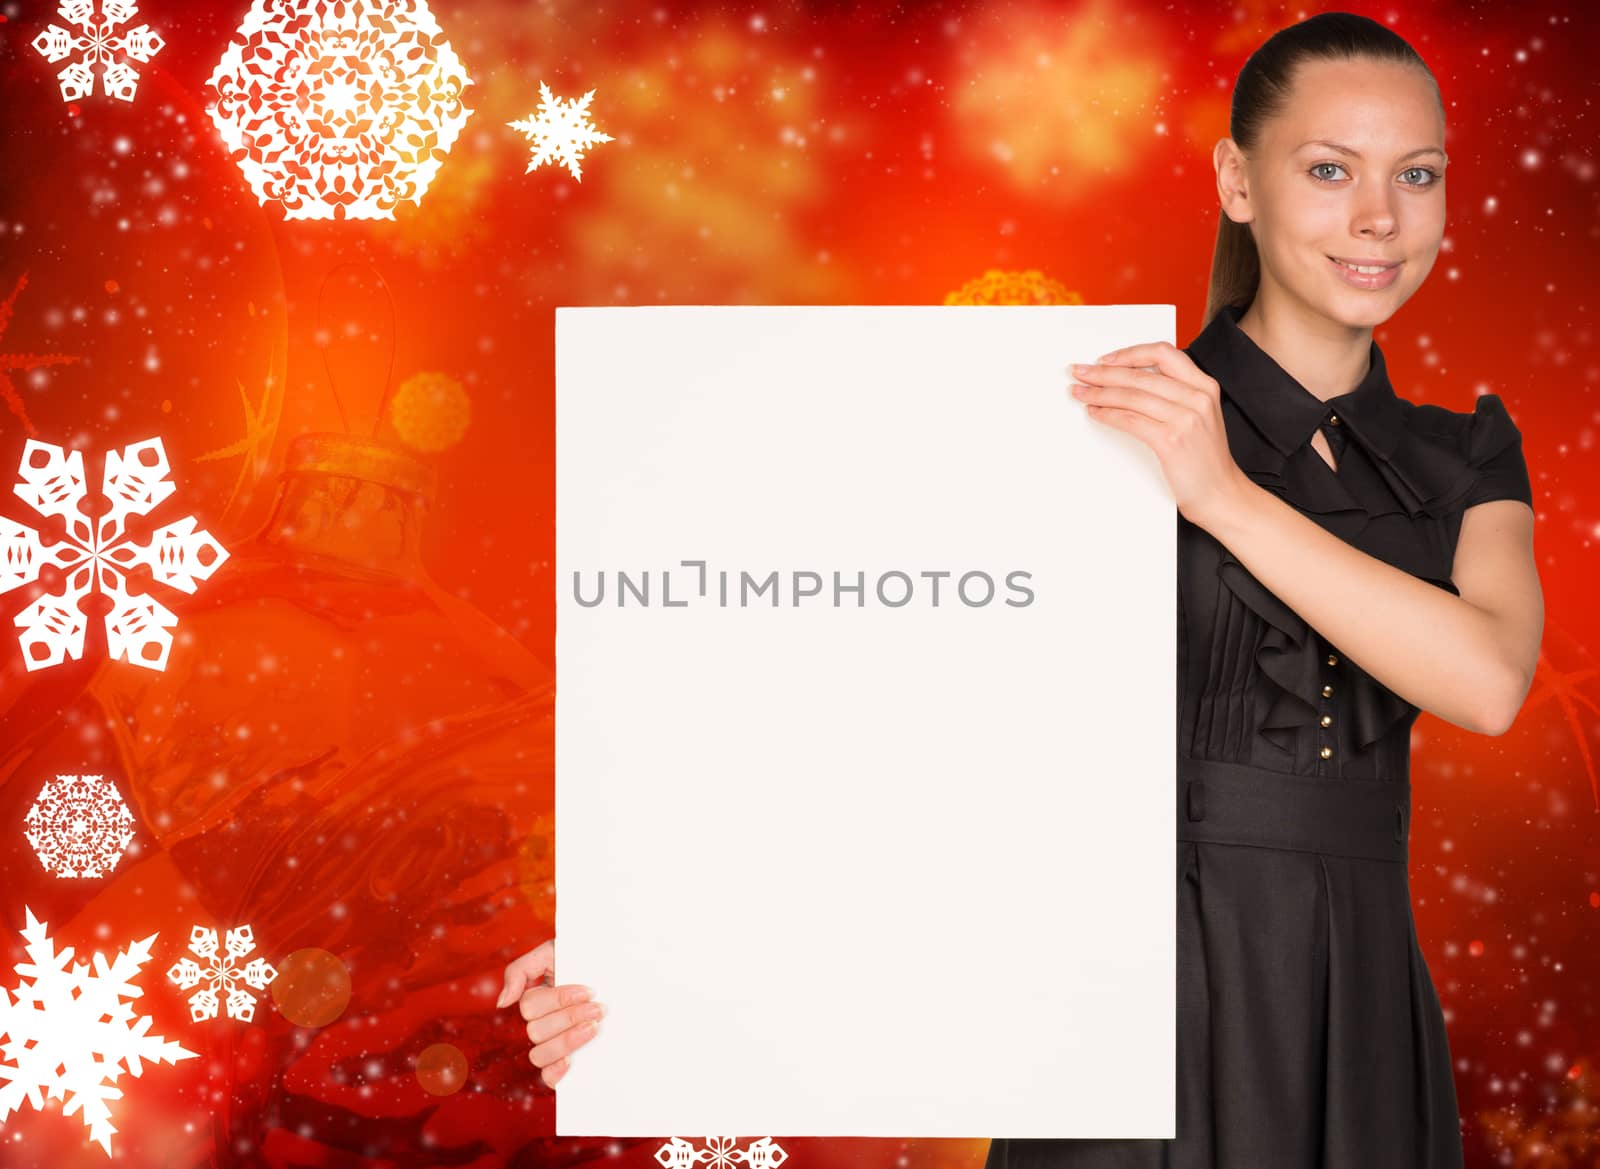 Businesswoman holding empty paper. Abstract christmas backgrond